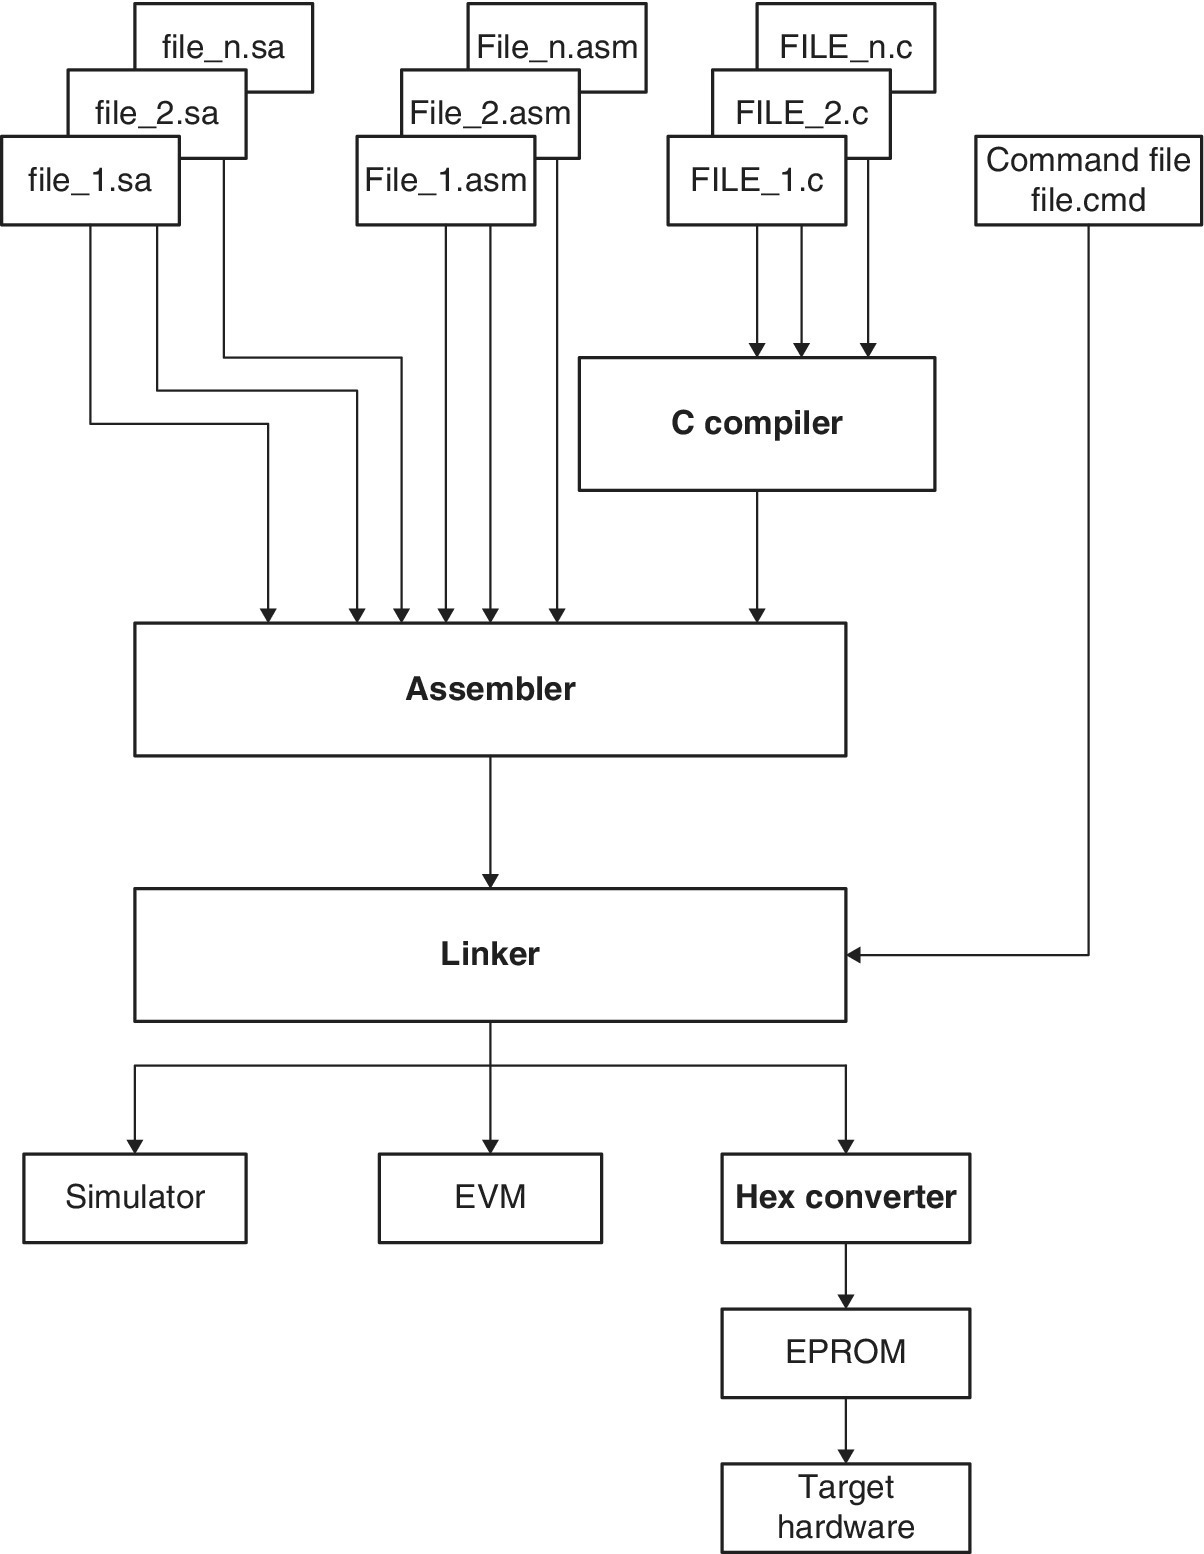 Flow chart illustrating the basic development tools starting from command file to C compiler, to assembler, to linker, to simulator, to EVM, to HEX converter, to EMPROM, to target hardware.